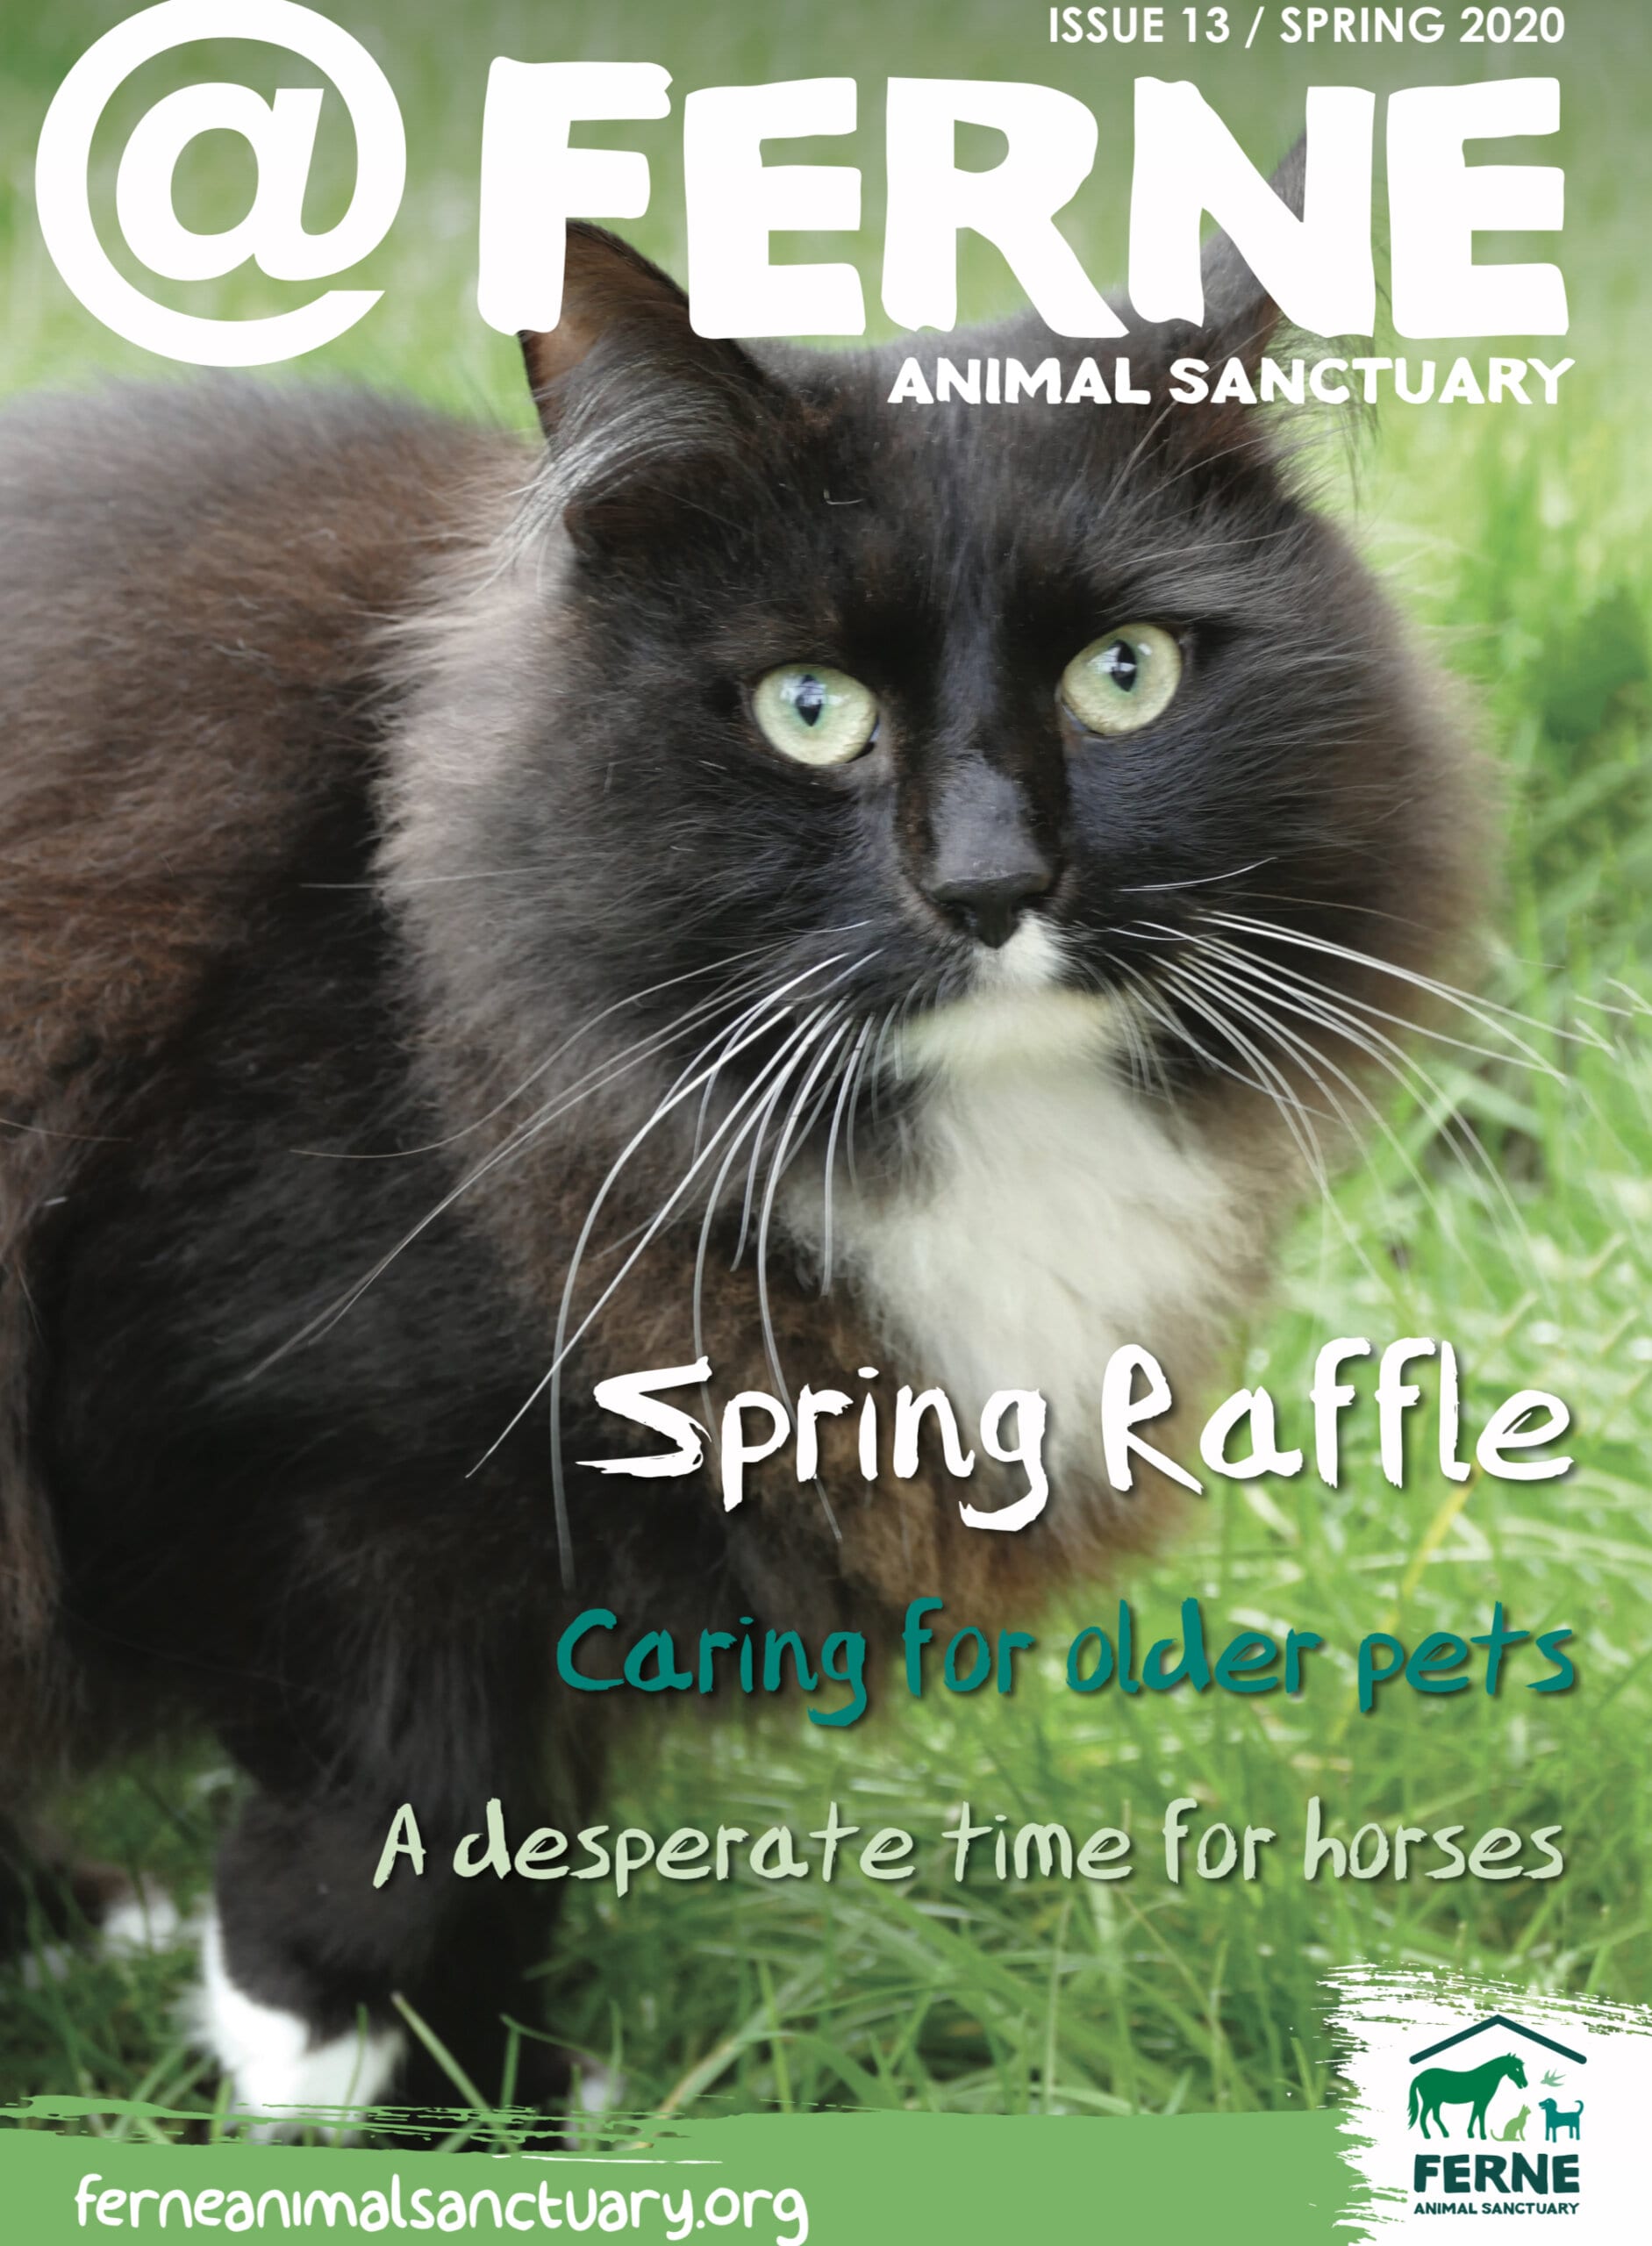 Catch up on all our news in our latest Spring Magazine